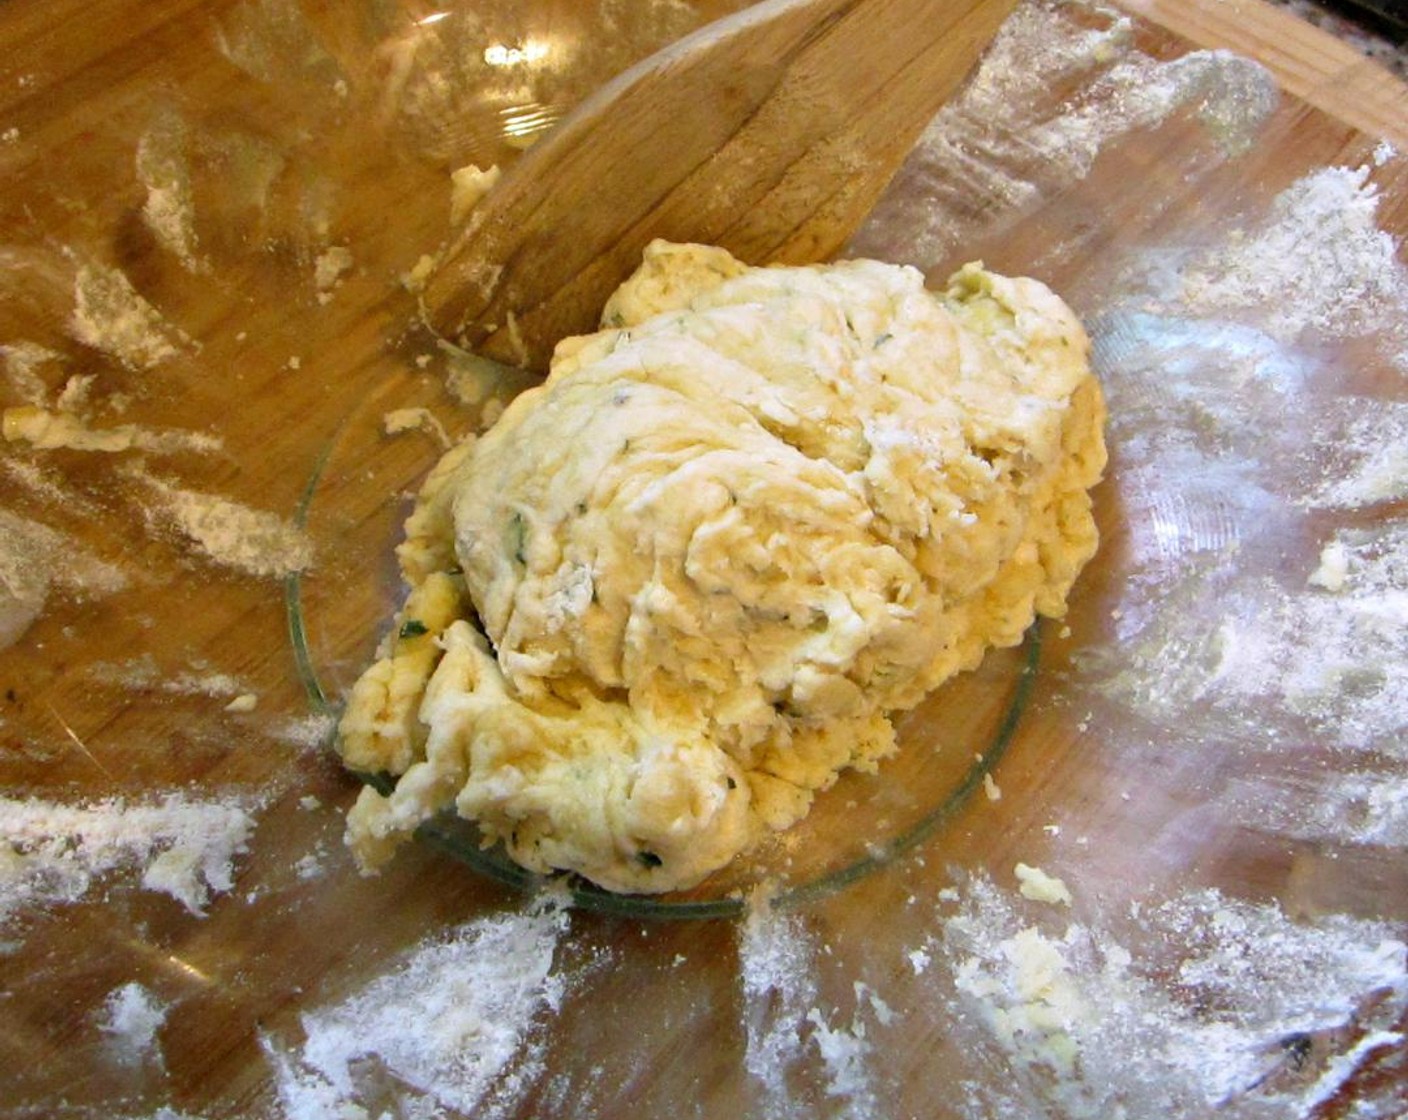 step 6 Divide the dough into 2 pieces. Roll out the first piece with a floured rolling pin to approximately 8x11 inches. Repeat with the second portion of the dough.